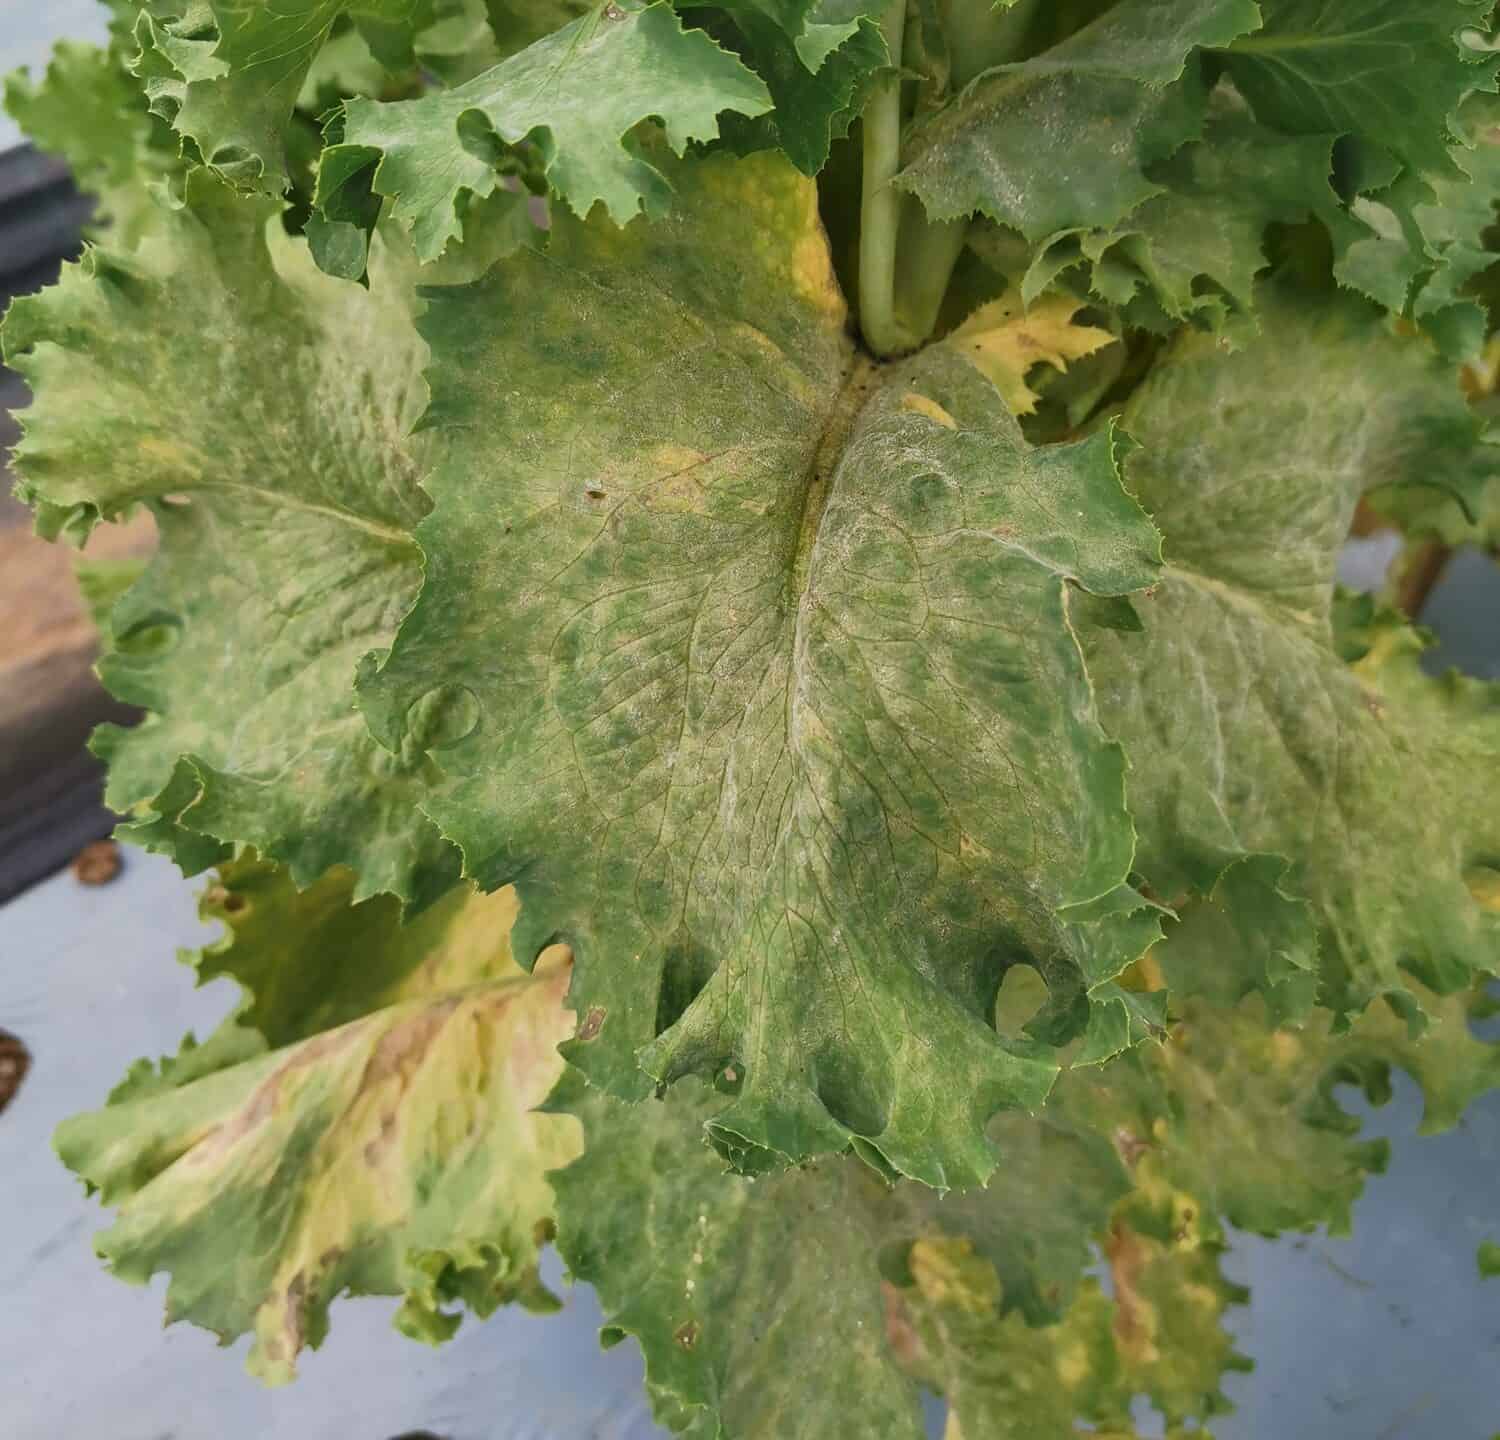 Leaf of Lettuce, which was destroyed by powdery mildew